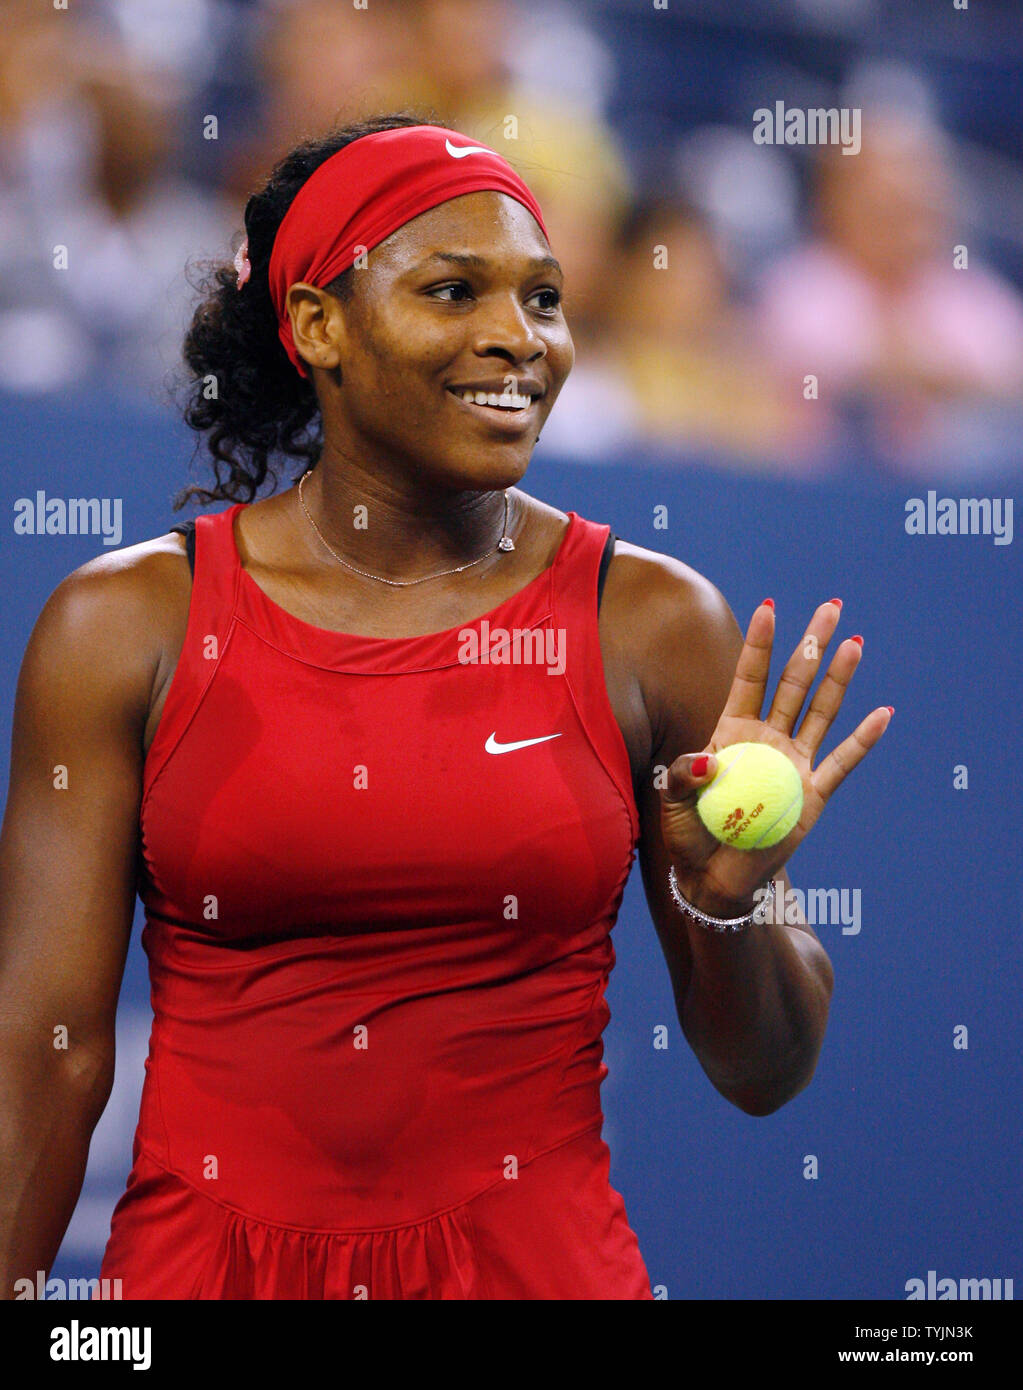 Serena Williams reacts after a challenge in her match against Severine Bremond on day eight at the U.S. Open Tennis Championships at the U.S. National Tennis Center in Flushing Meadows, New York on September 1, 2008. Williams defeated Bremond 6-2 6-2.        (UPI Photo/John Angelillo) Stock Photo